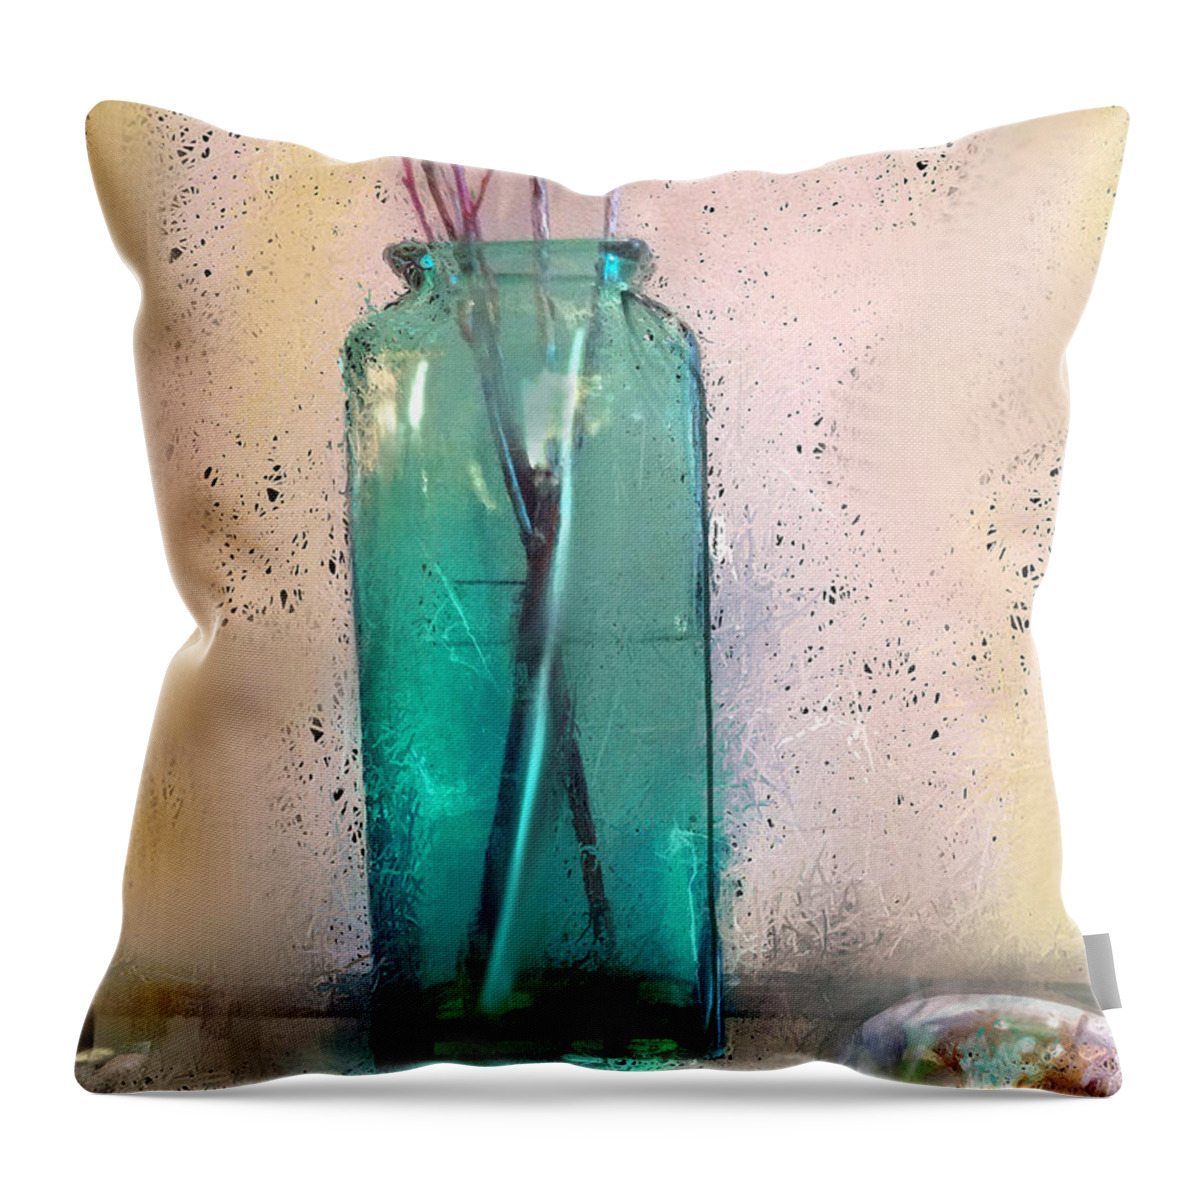 Vase Throw Pillow featuring the mixed media Green Vase #1 by Russell Pierce